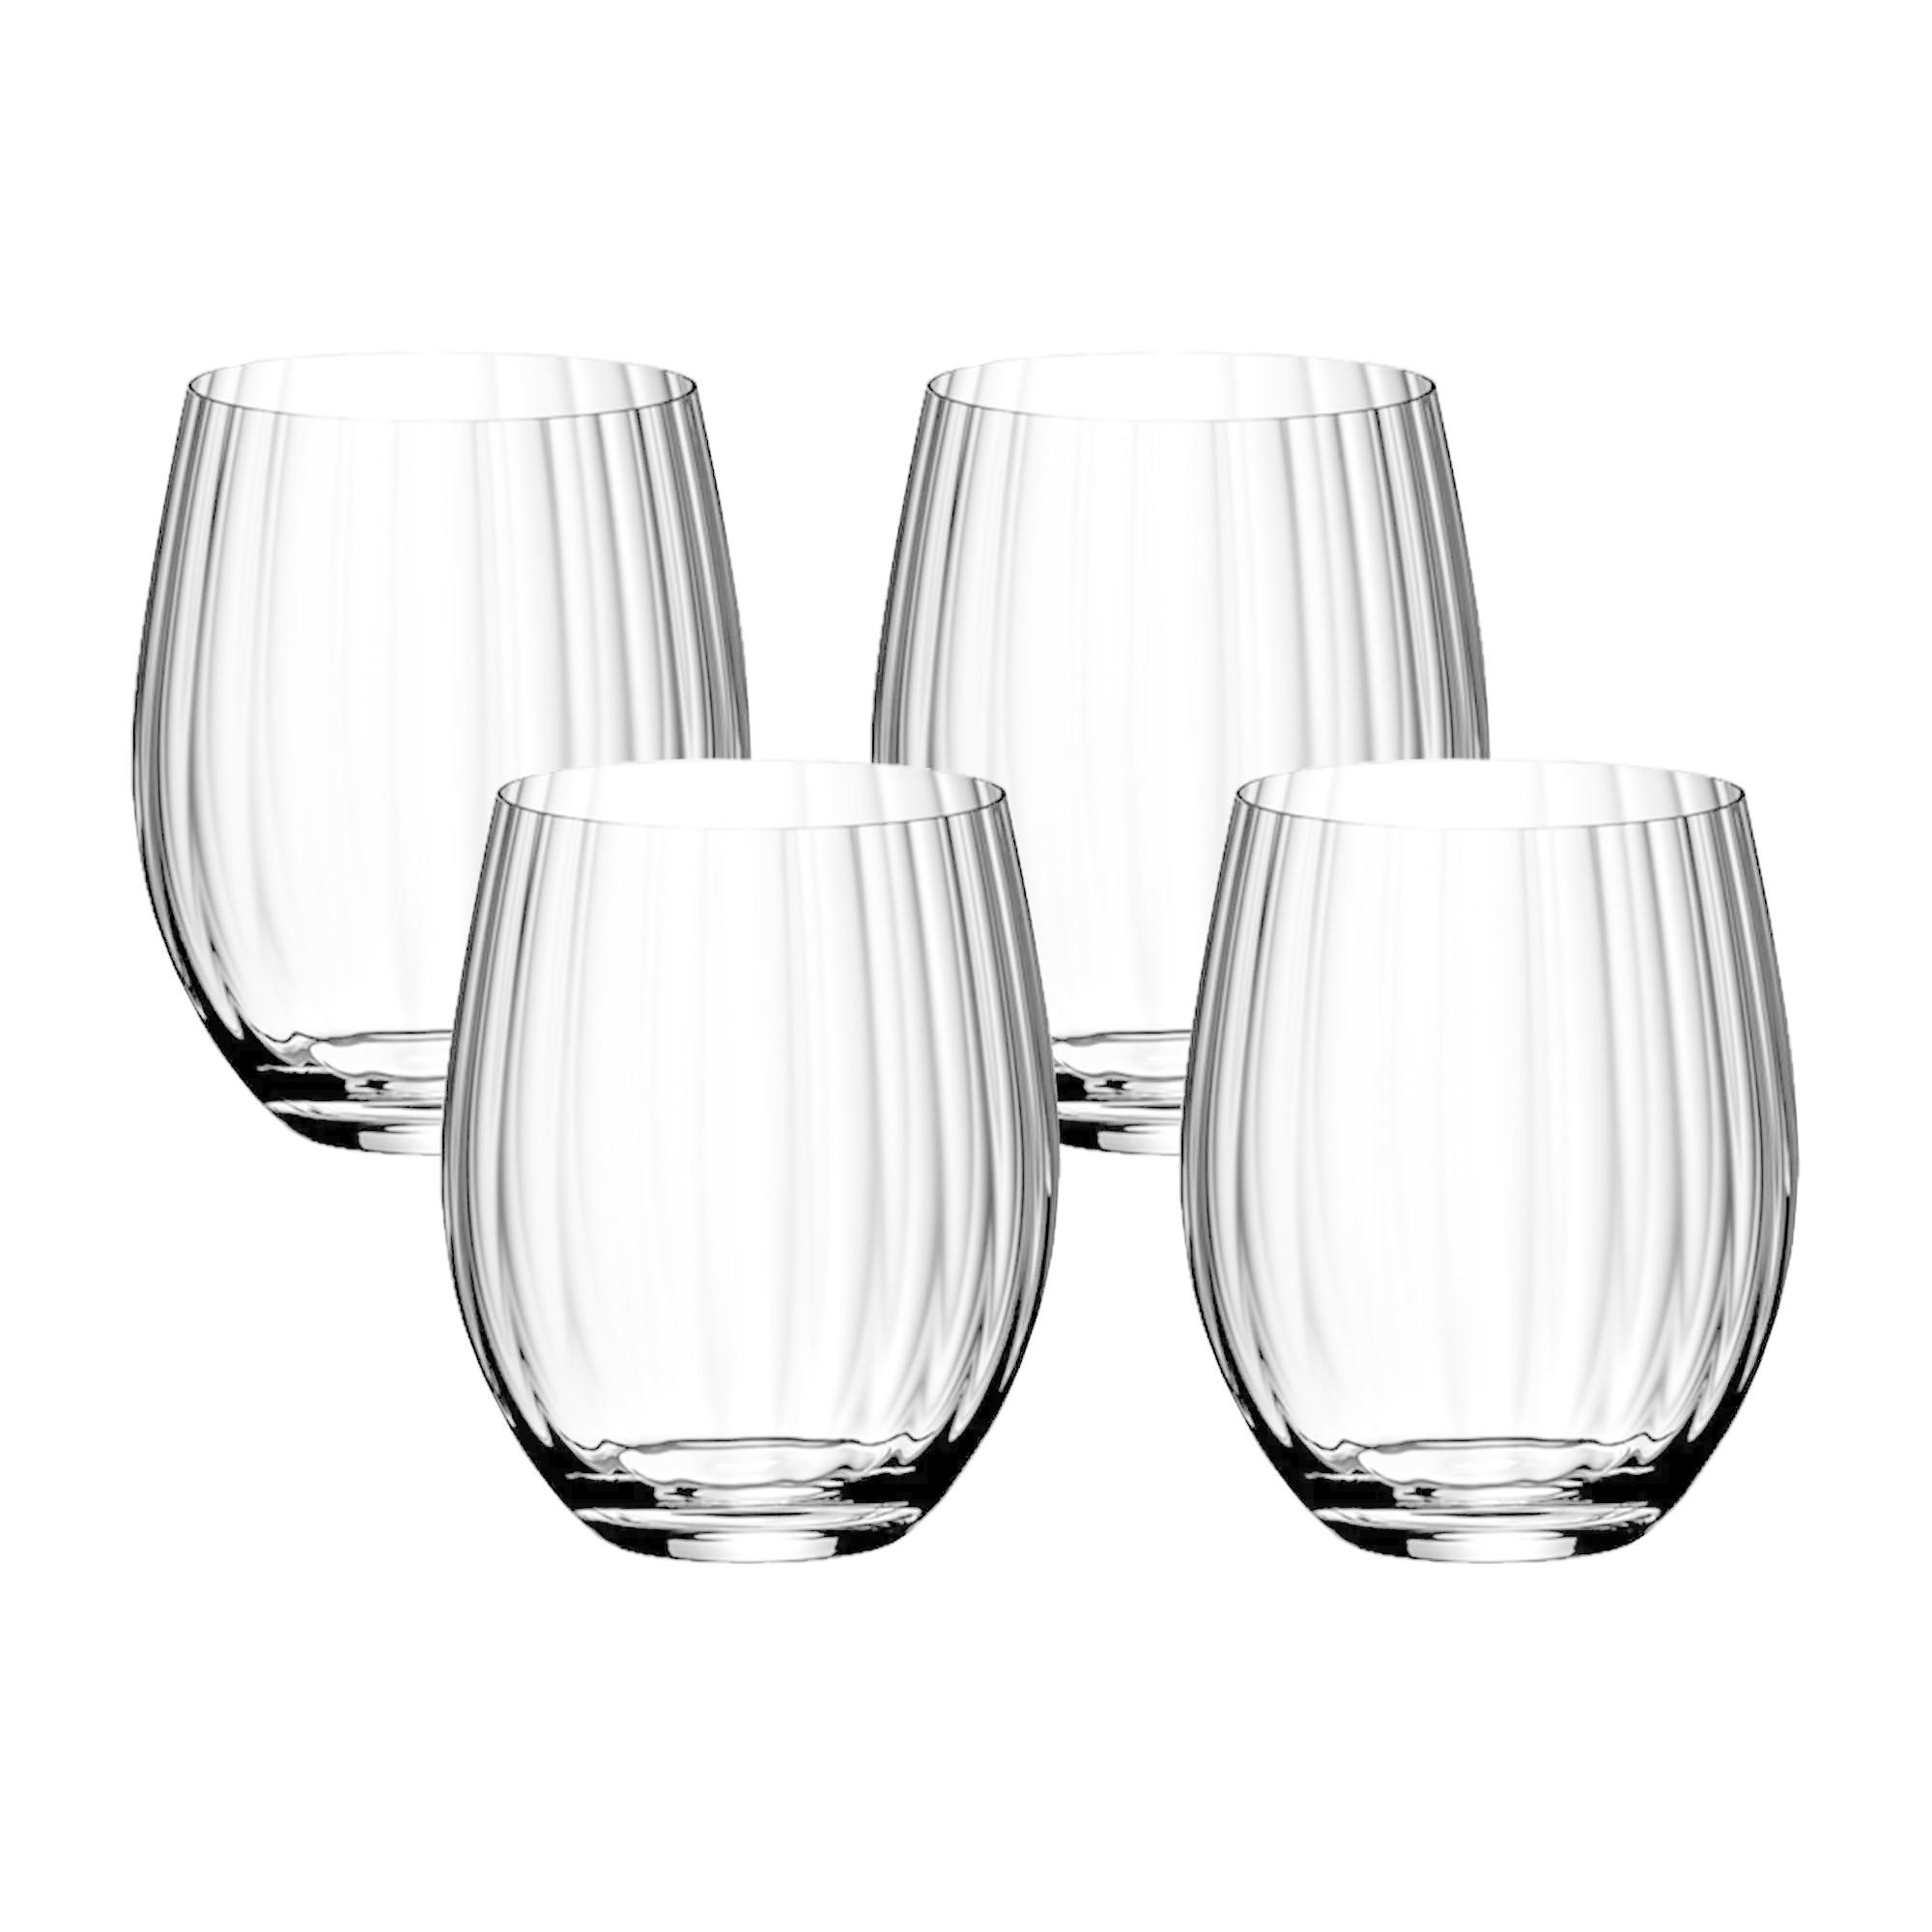 Riedel Mixing Tonic Glass 580ml Set of 4 Image 4